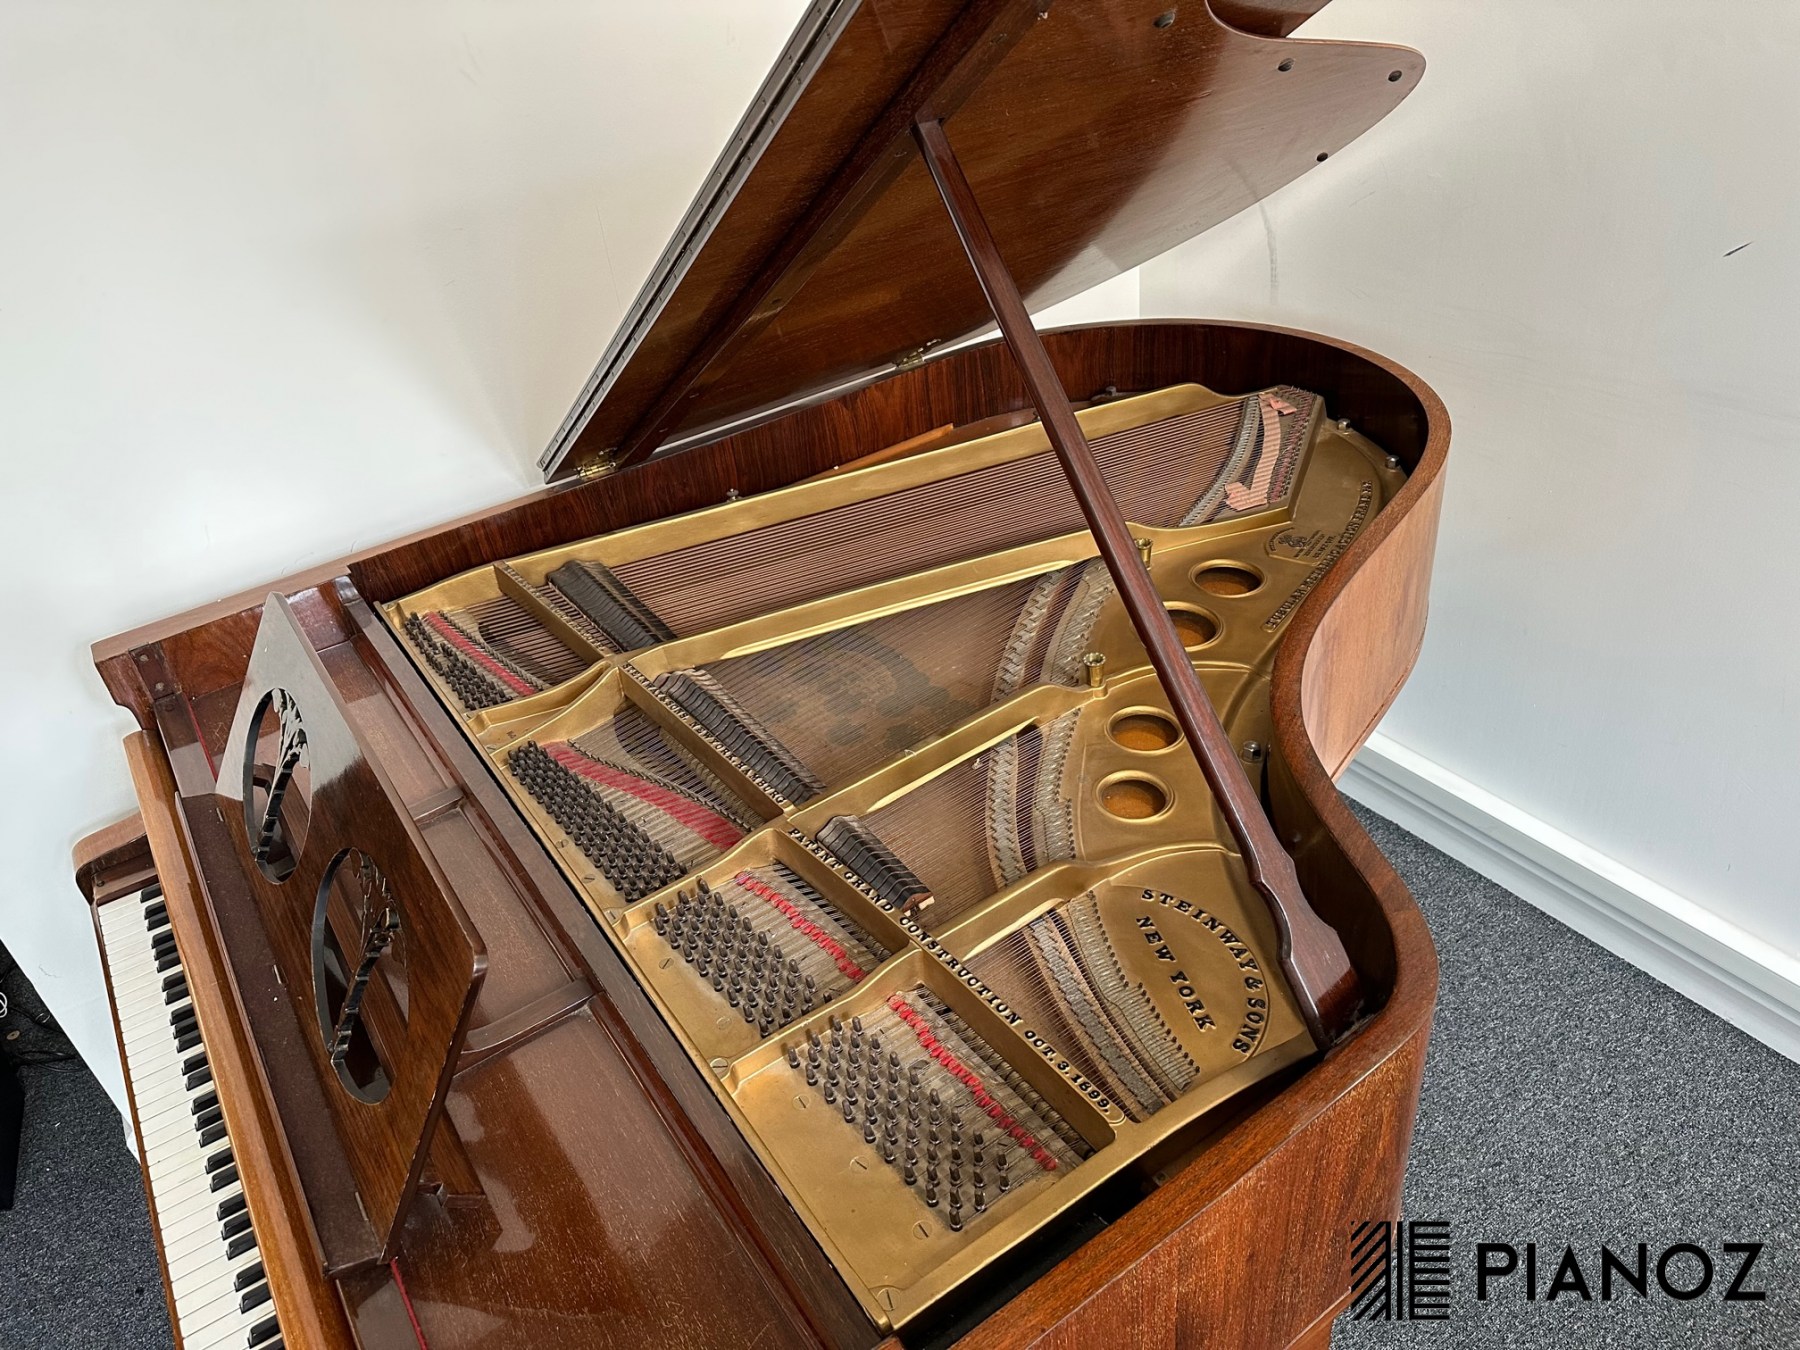 Steinway & Sons Model O Grand Piano piano for sale in UK